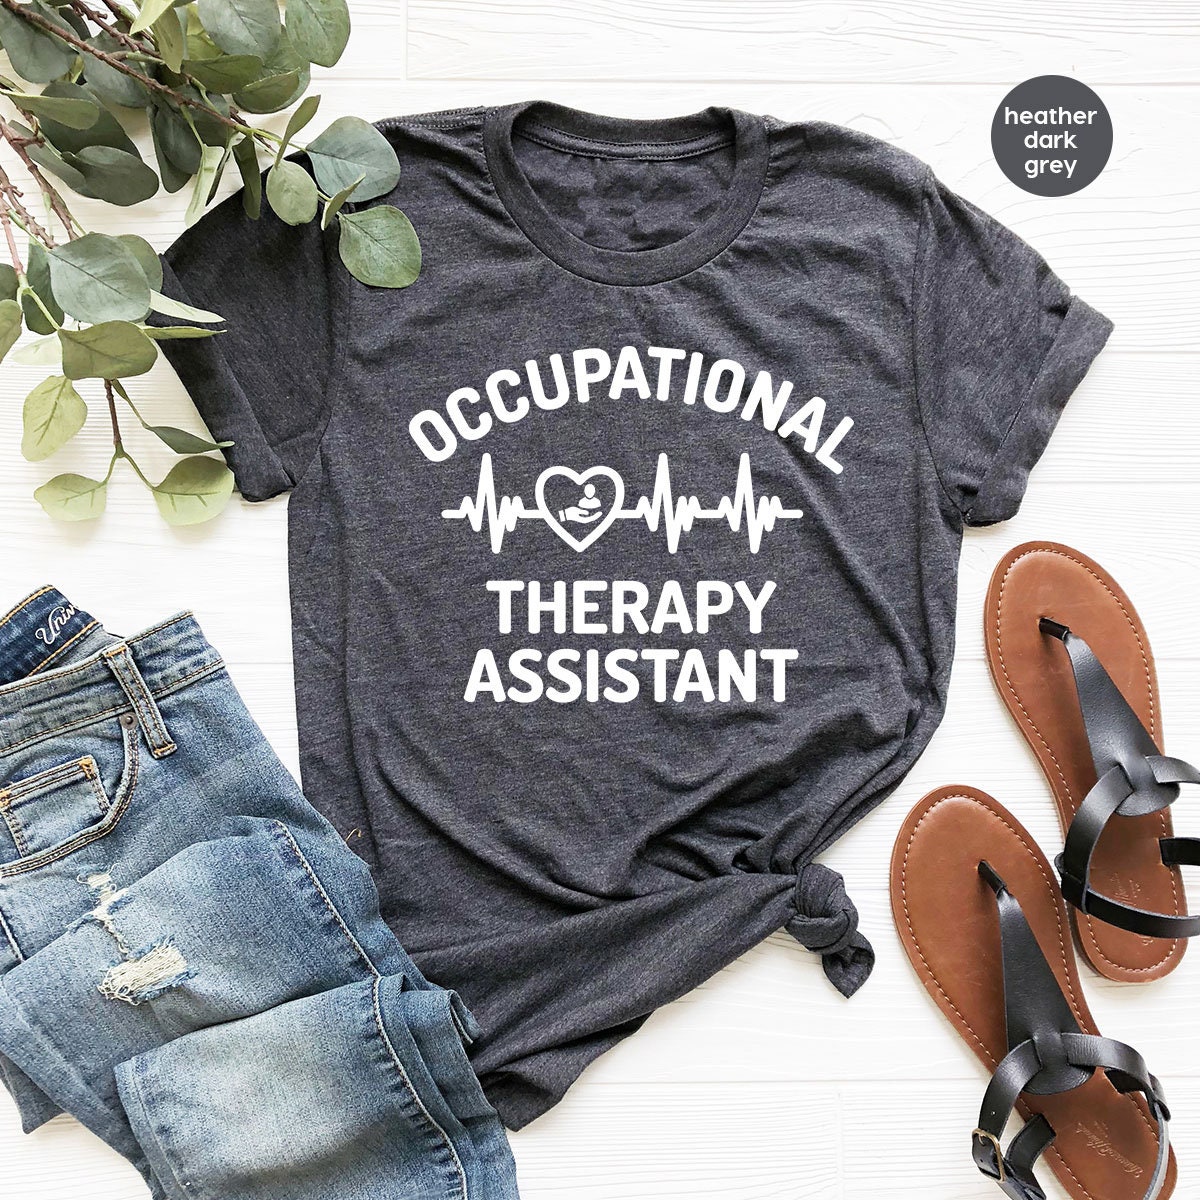 Discover Occupational Therapy Assistant Shirt, Therapist Shirt, Gift for Therapist, Assistant Shirt, Positive Tee, Therapy Sweatshirt, Therapist Gift